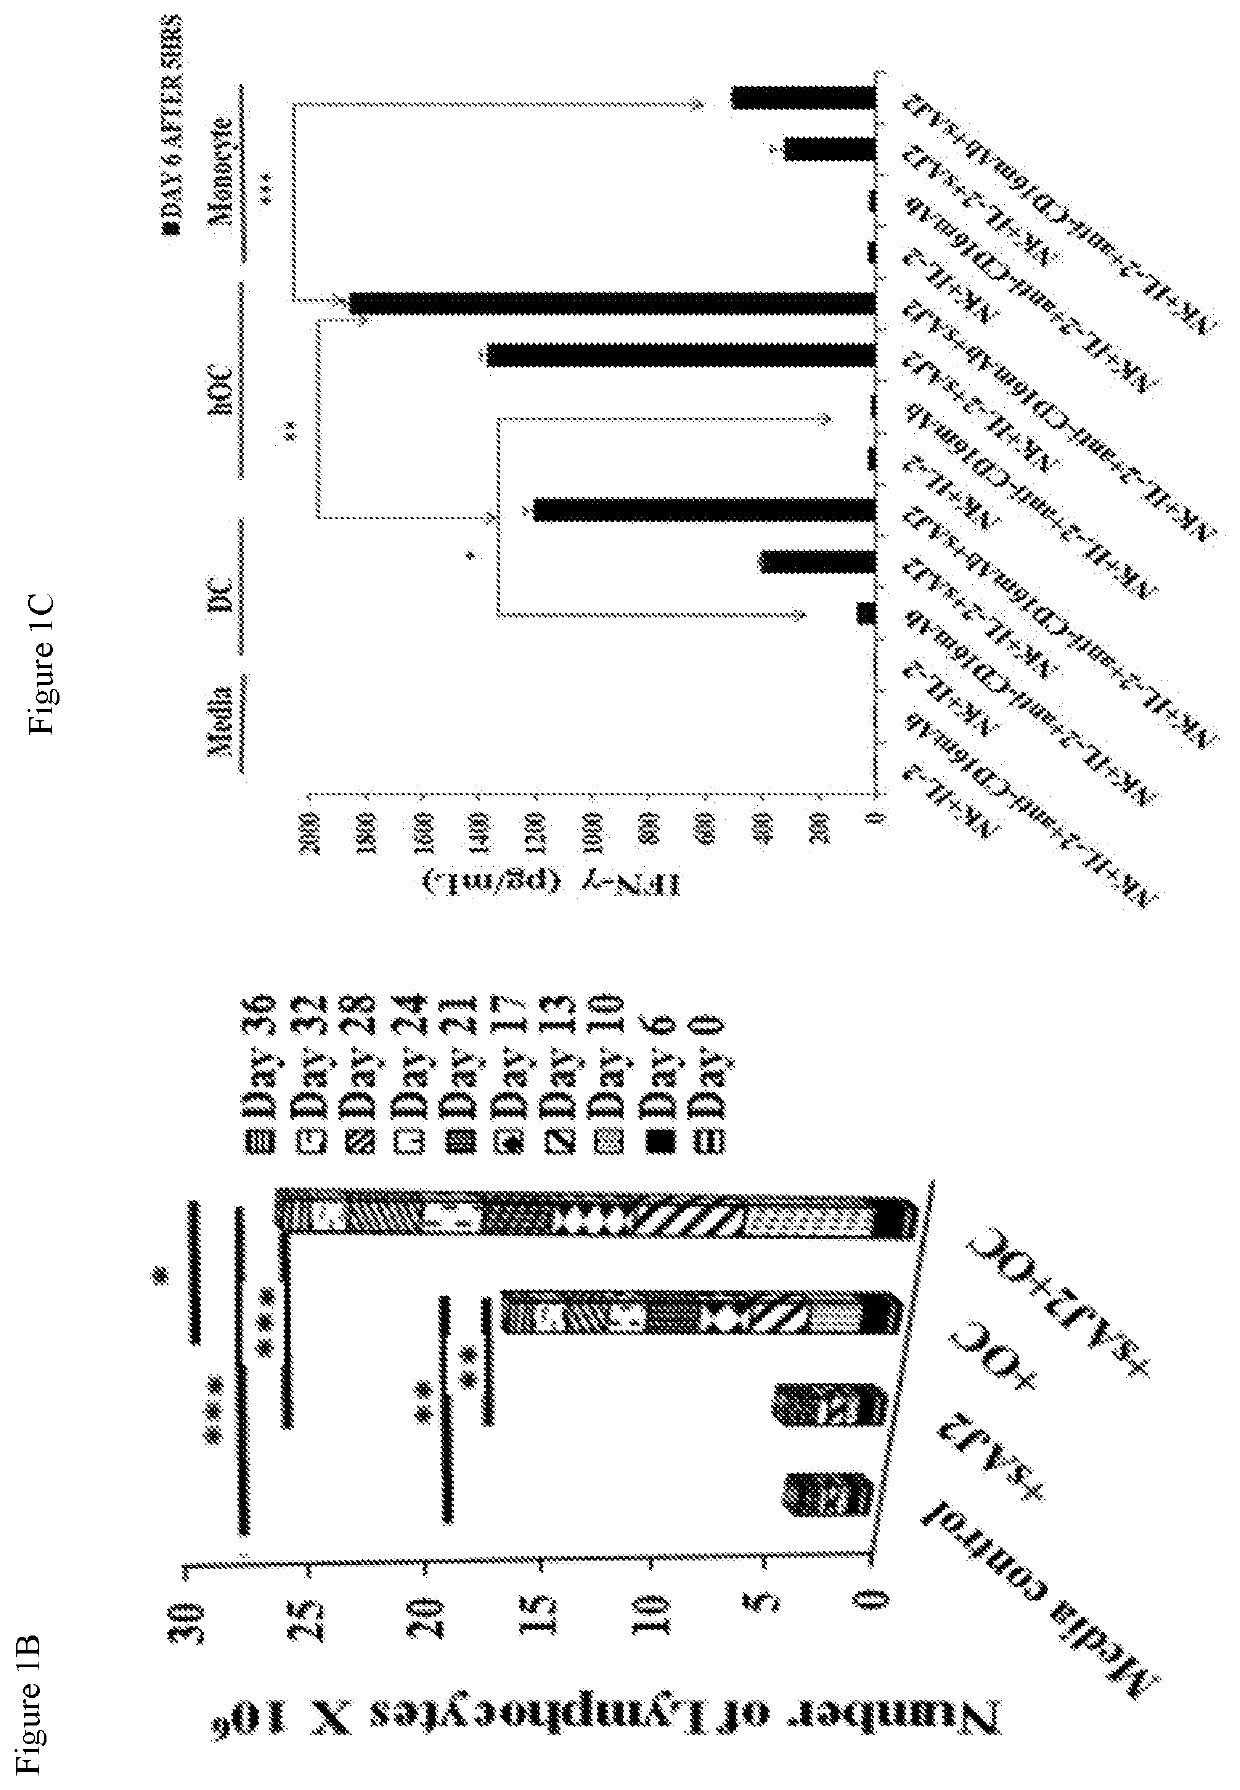 Compositions and methods for activating nk cells